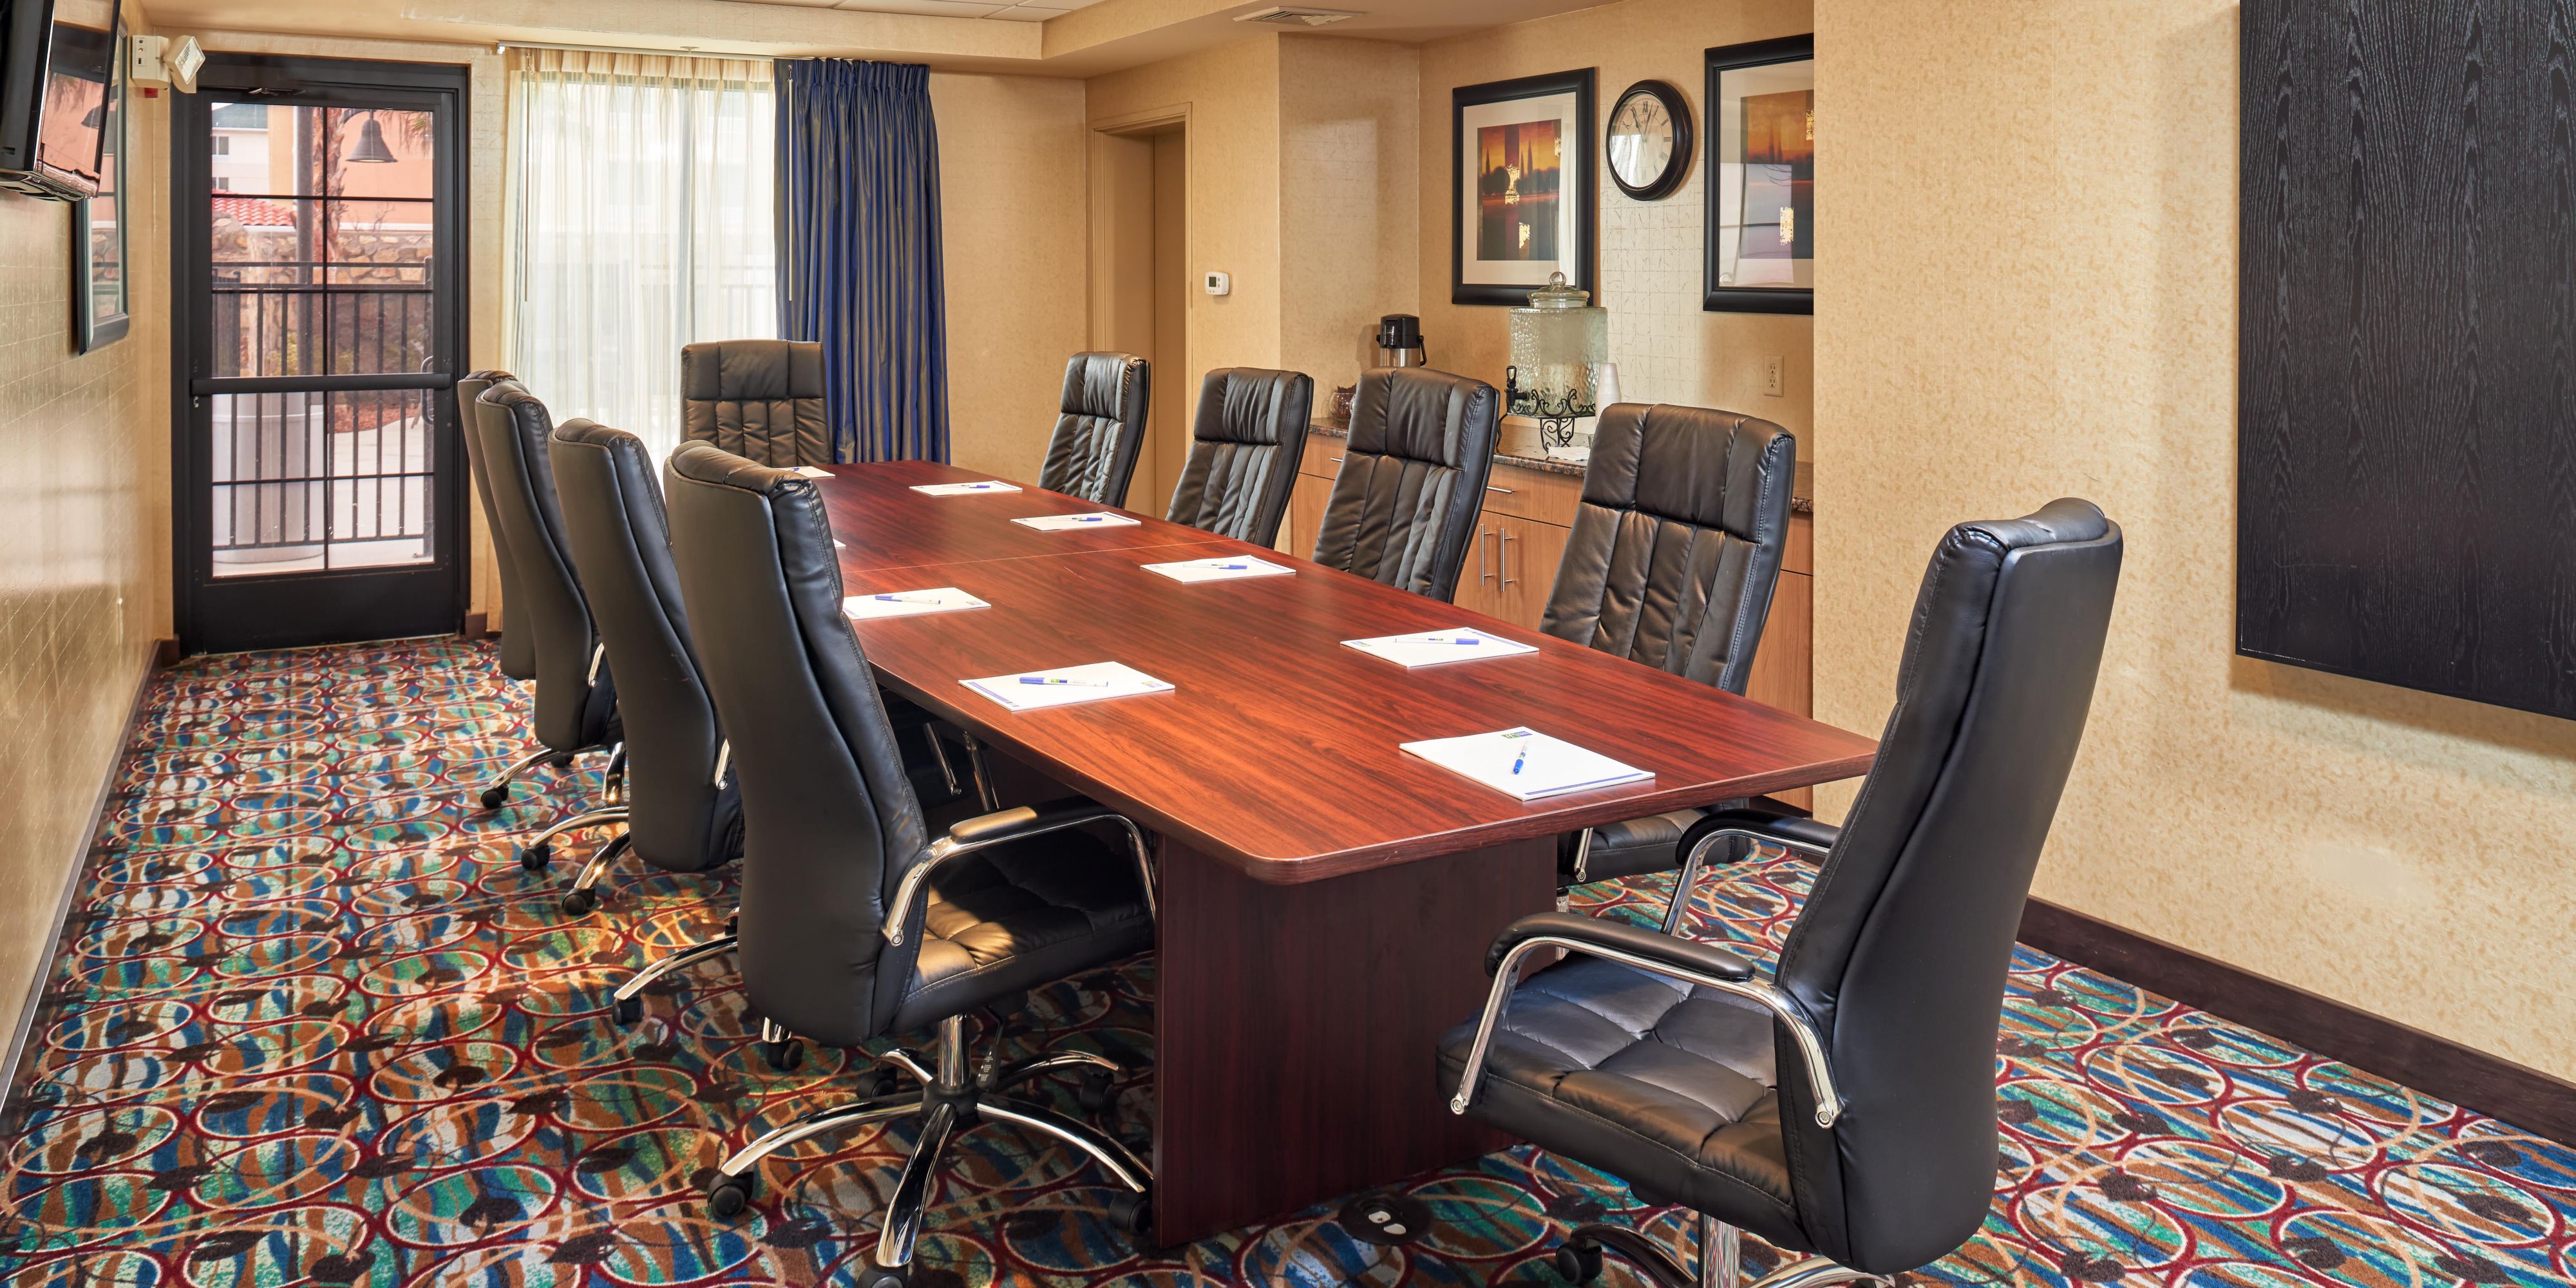 Host a small scale business meeting or a unique special occasion in our versatile meeting space, which can accommodate up to 17 of your colleagues or closest friends and family members. Contact our Sales Office for your next event.